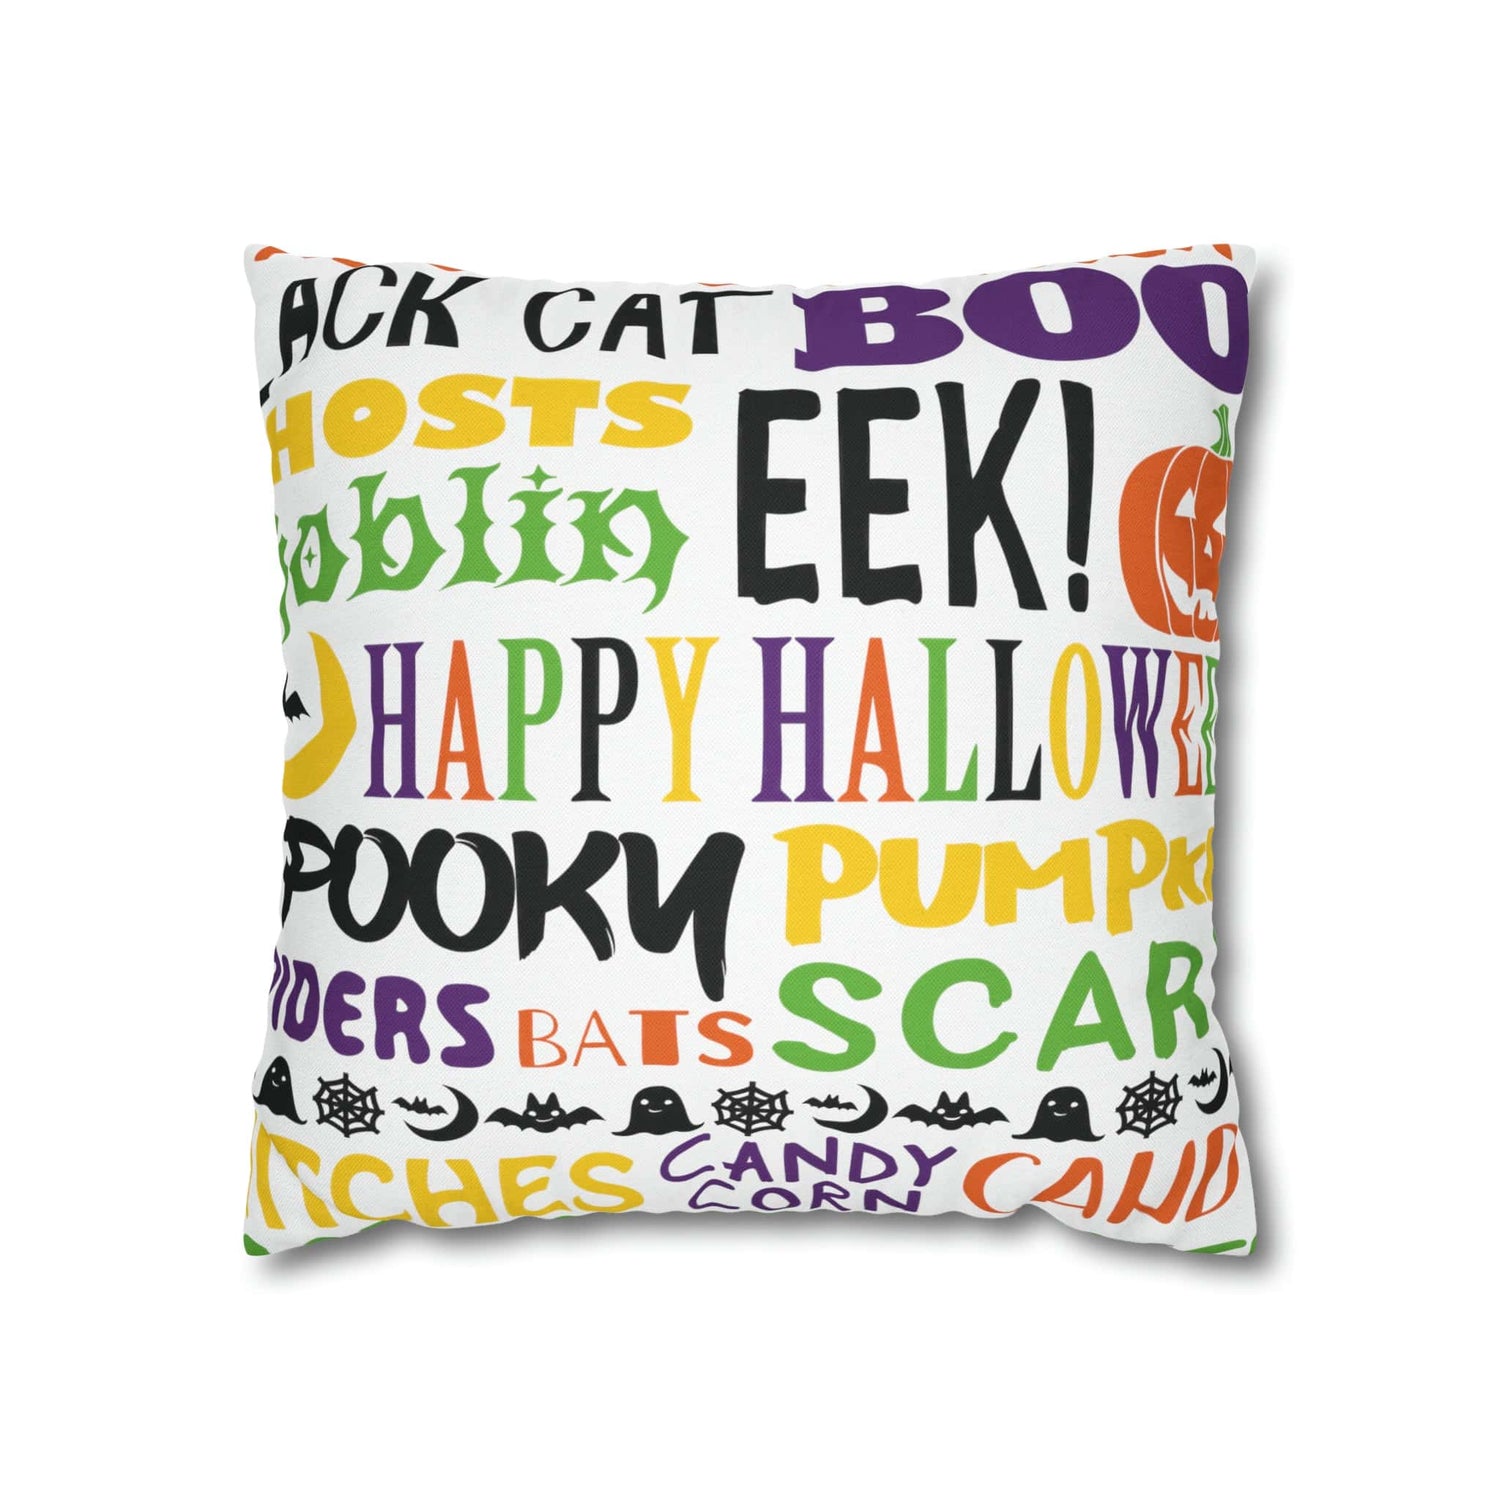 Kate McEnroe New York Halloween Throw Pillow Cover, Trick or Treat, Spooky Witches Haunted House Accent Pillow, Country Farmhouse Home Decor GiftThrow Pillow Covers26910691176192571015